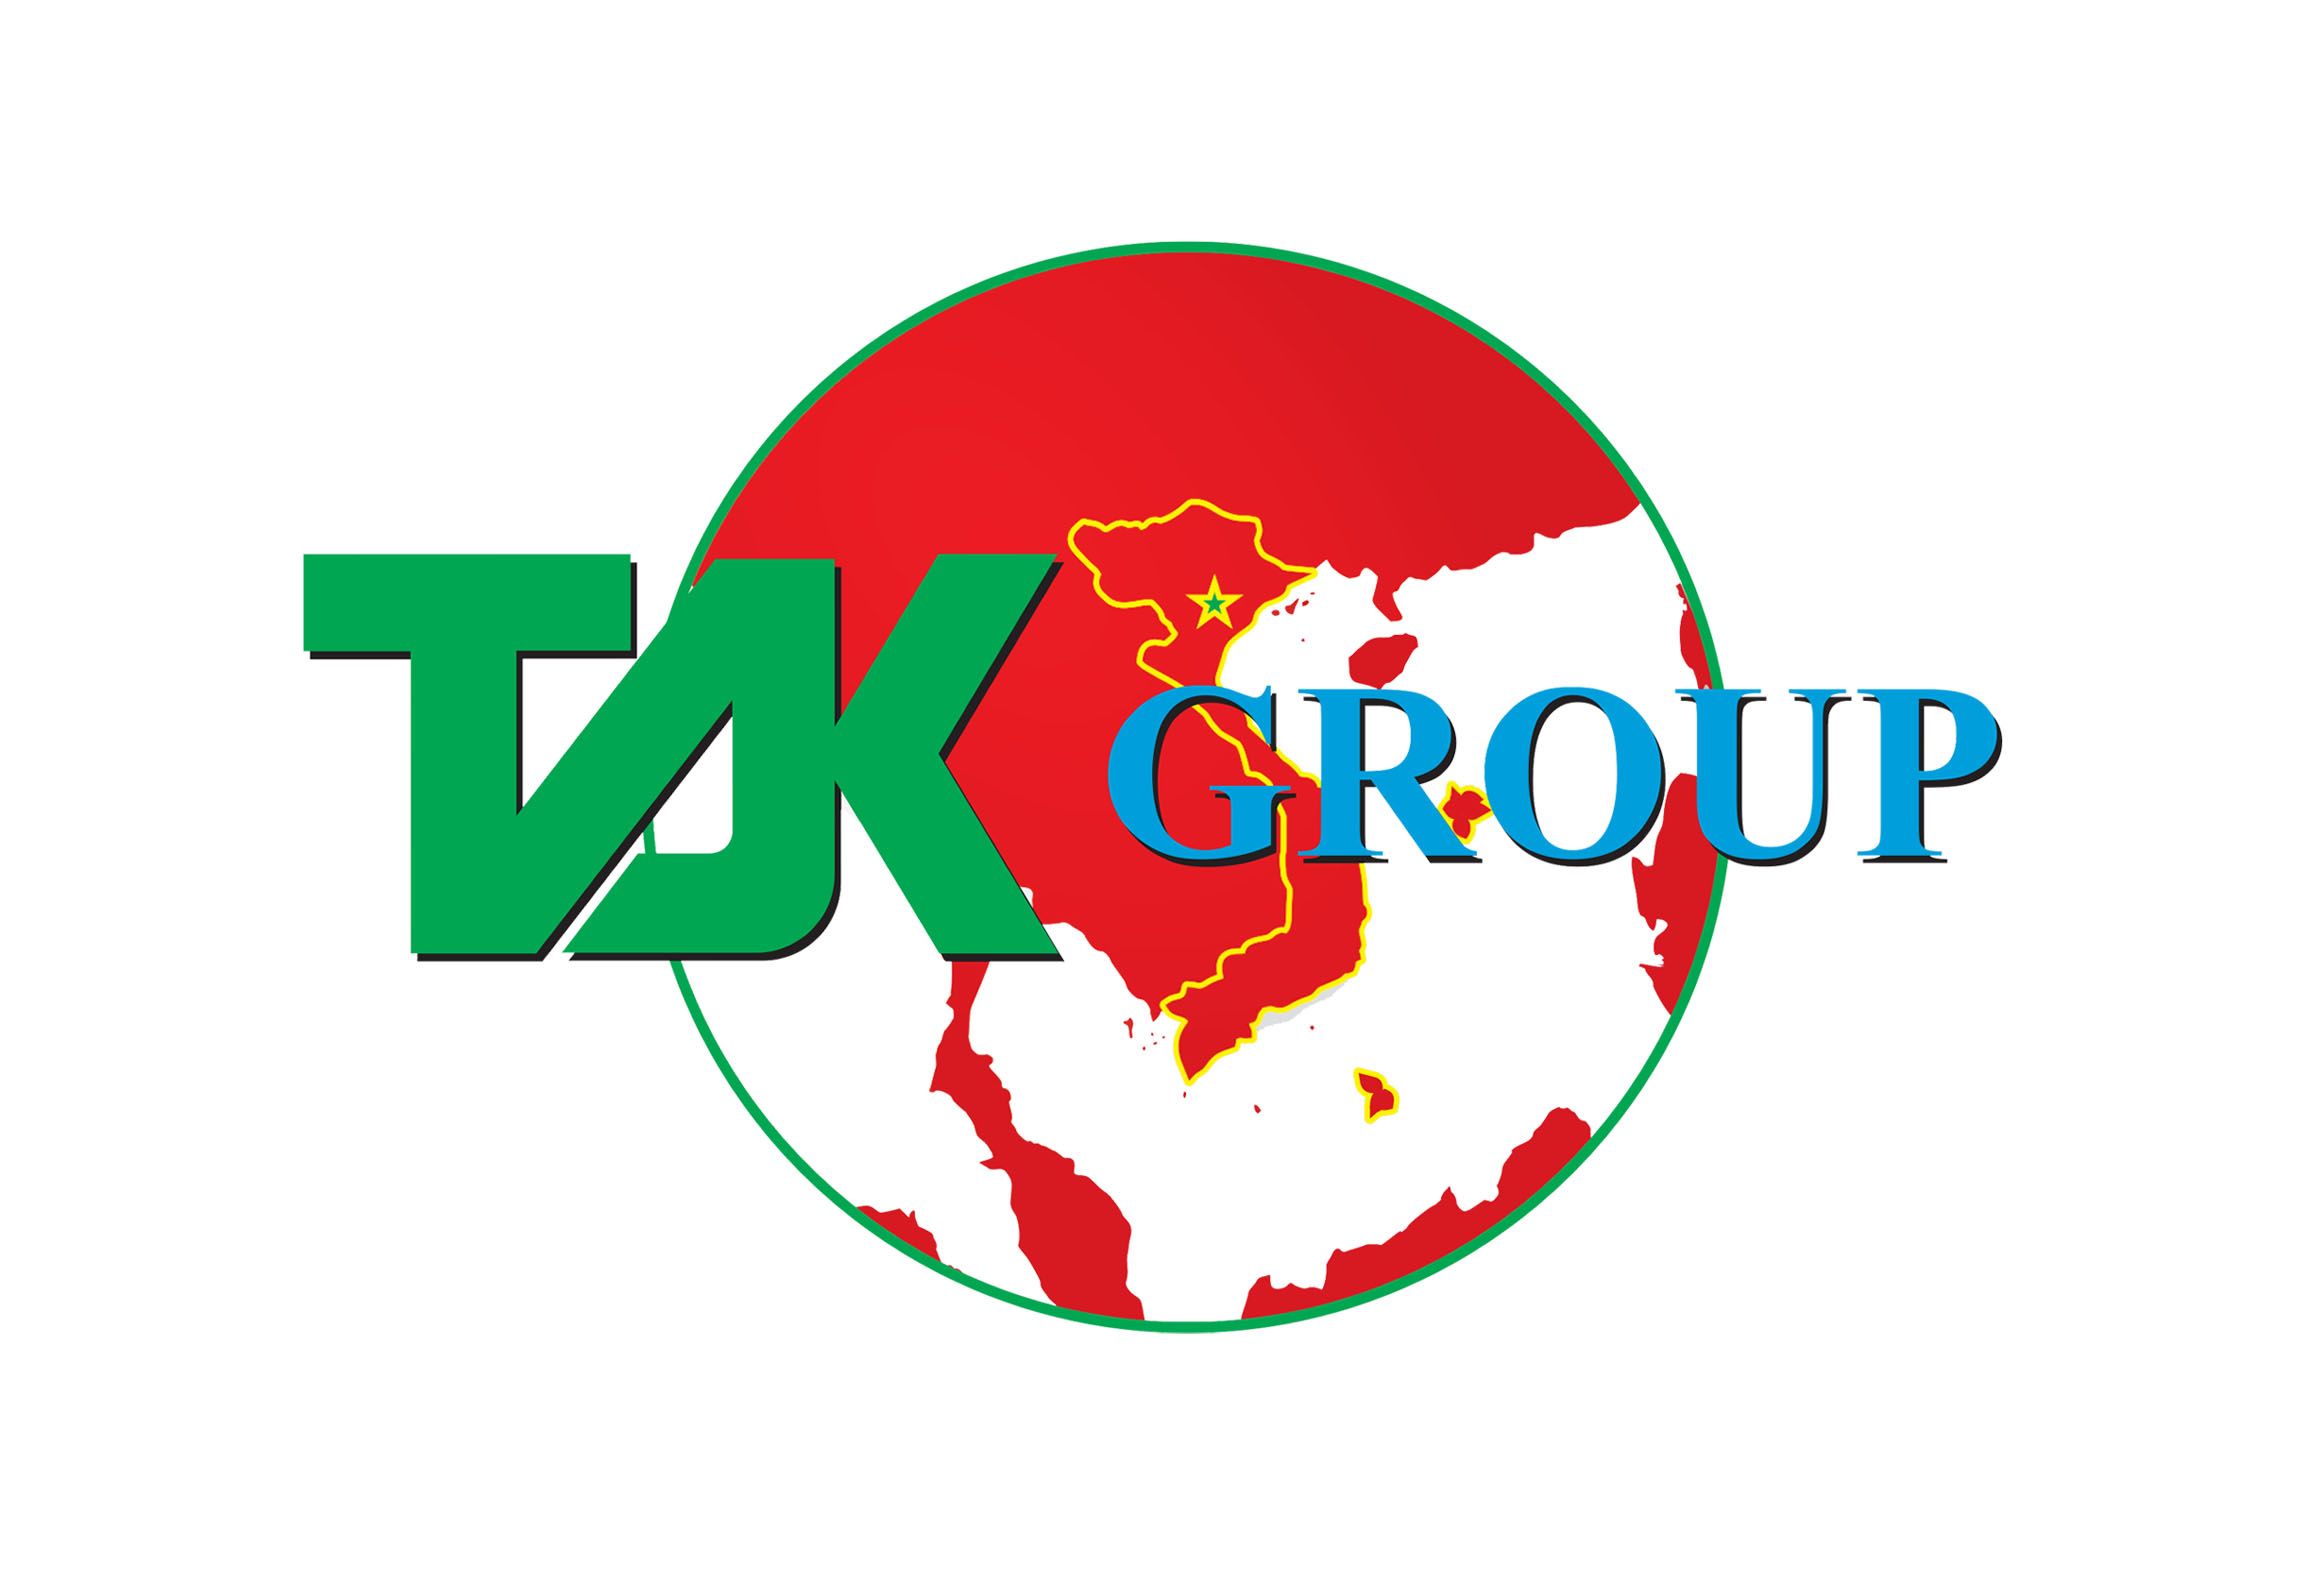 TSK GROUP – 10 YEARS OF EFFORT TO REACH OUT OF THE SEA